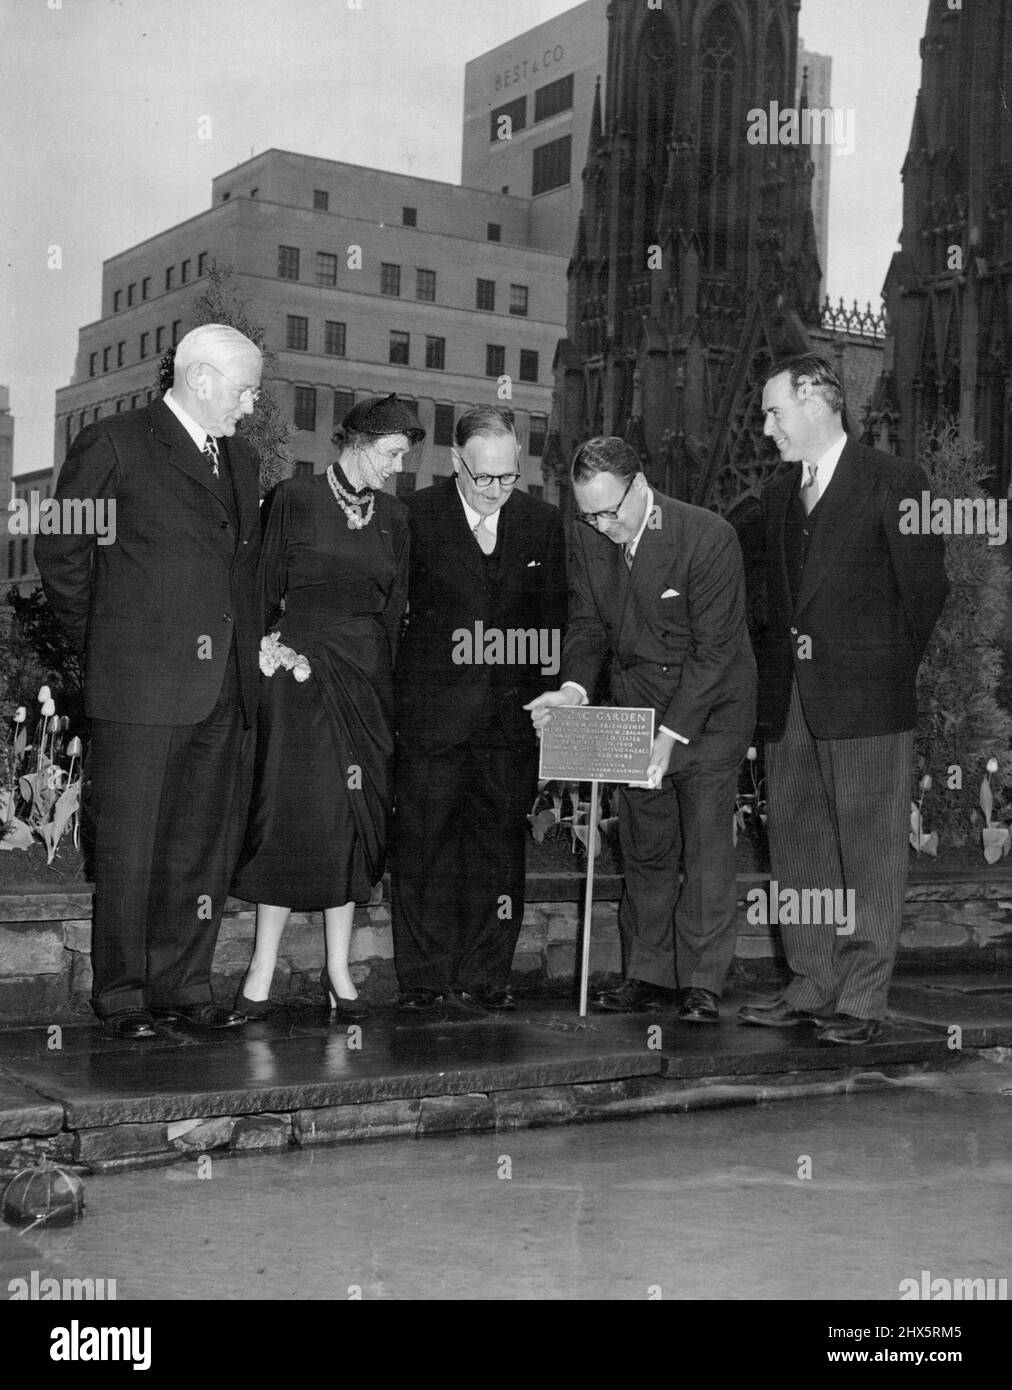 Celebrating the 10th anniversary of the dedication of the Anzac Garden atop the British Empire Building in Rockefeller Center on Sunday, April 23, 1950, are: (L. to r.) Lt. Gen. E.K. Smart, Australian Consul General; Miss Nola Luxford, wartime President of the Anzac Club of N.Y.; The Honorable Norman Makin, Australian Ambassador to the U.S.; G.S. Eyssell, Executive Vice President of Rockefeller Center, Inc., and Mr. D.W. Woodward, New Zealand Consul General. During the ceremony a bronze plaque to be placed in the garden was presented to Rockefeller Center. The inscription on the plaque is as Stock Photo